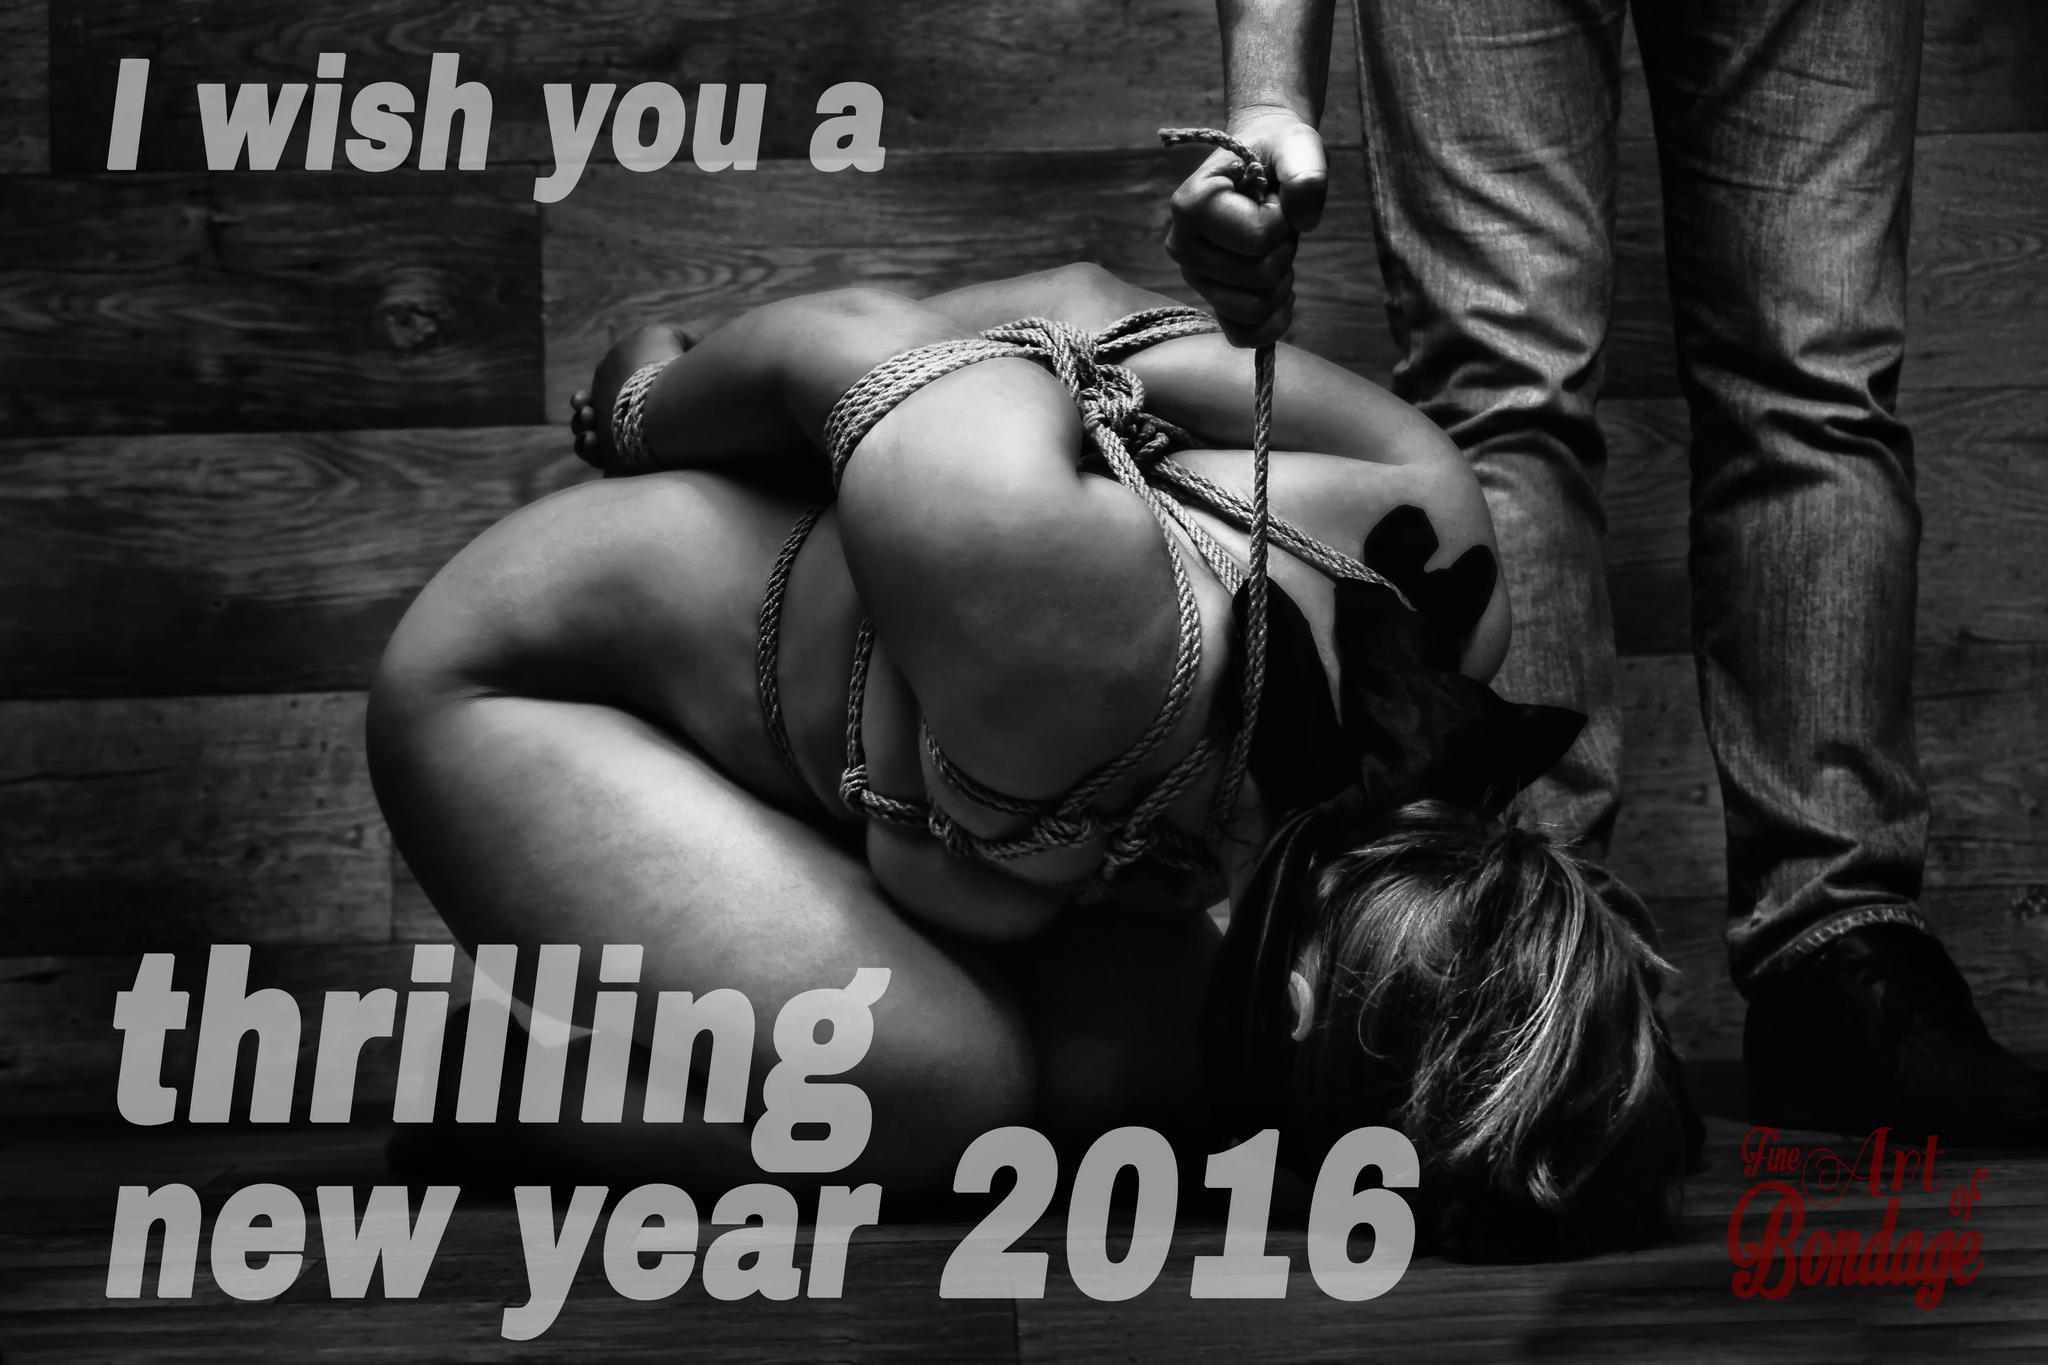 Wish you a happy and thrilling new year 2016 - Fine Art of Bondage